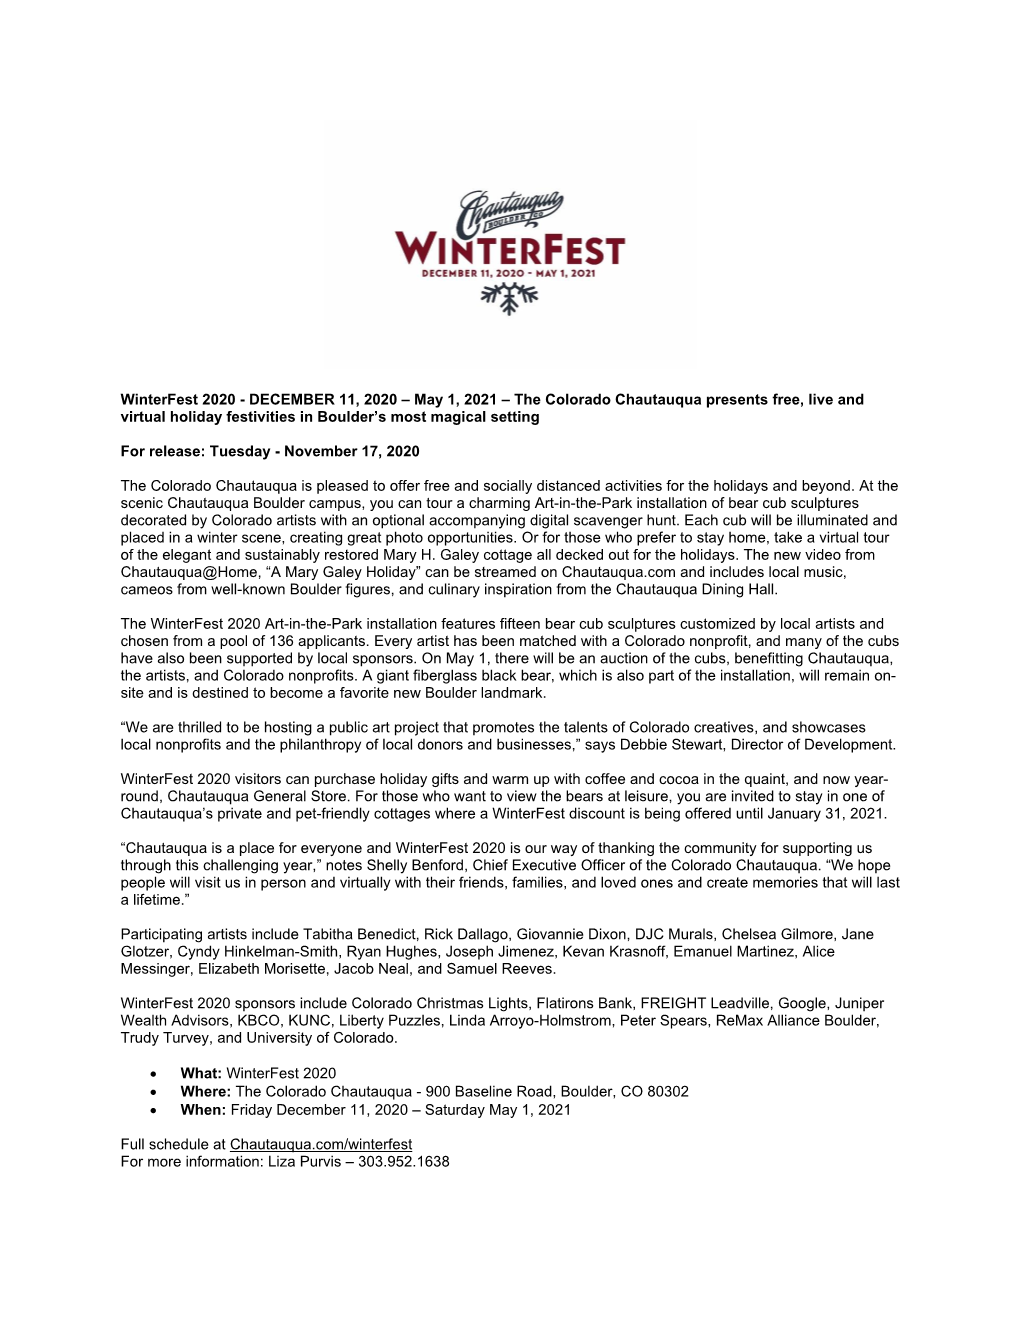 Winterfest 2020 - DECEMBER 11, 2020 – May 1, 2021 – the Colorado Chautauqua Presents Free, Live and Virtual Holiday Festivities in Boulder’S Most Magical Setting